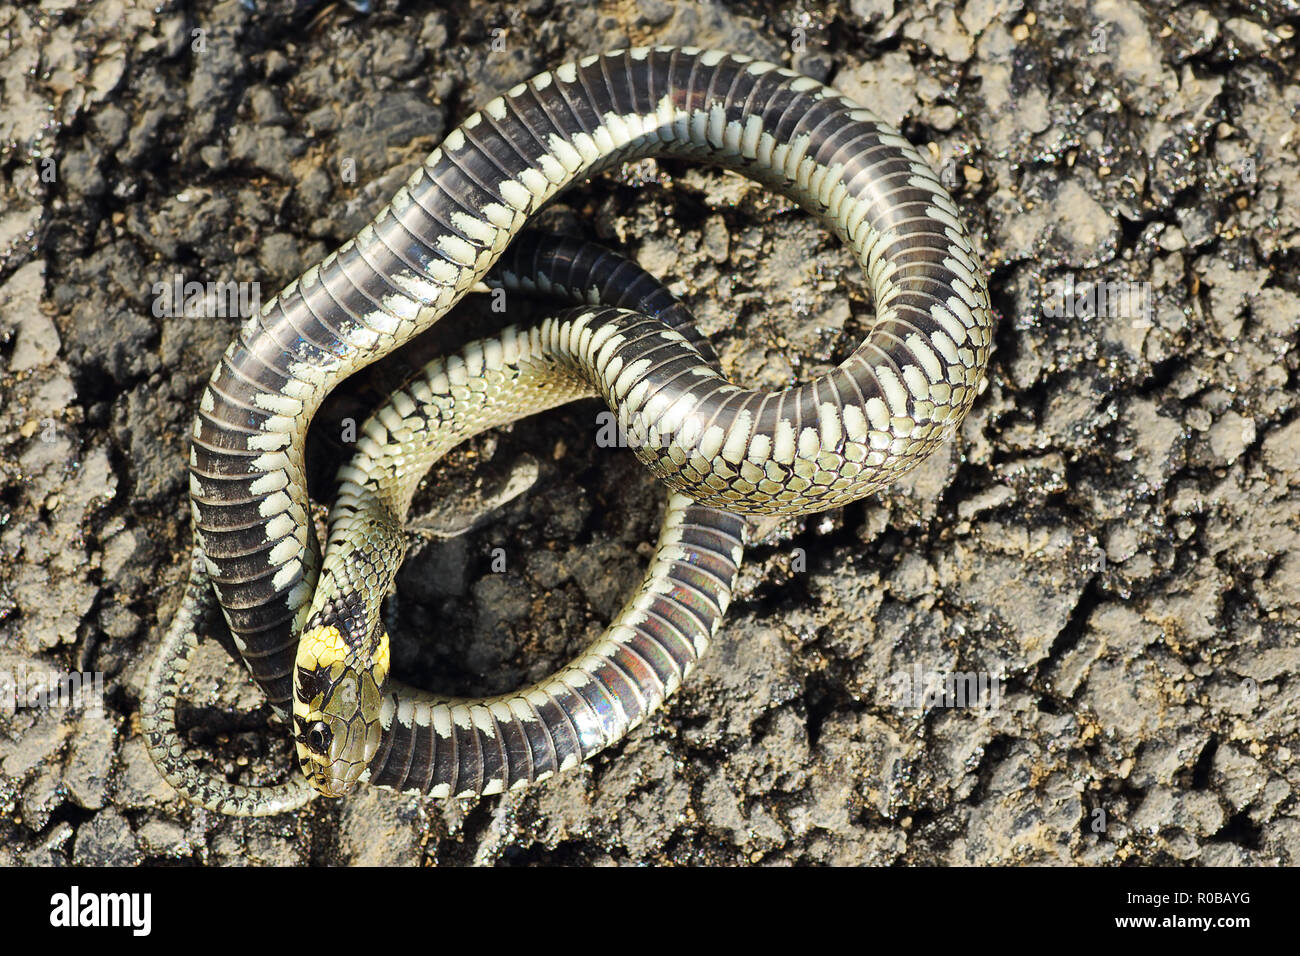 Grass snake juvenile playing dead, Alvao, Portugal - Stock Image -  C041/6117 - Science Photo Library